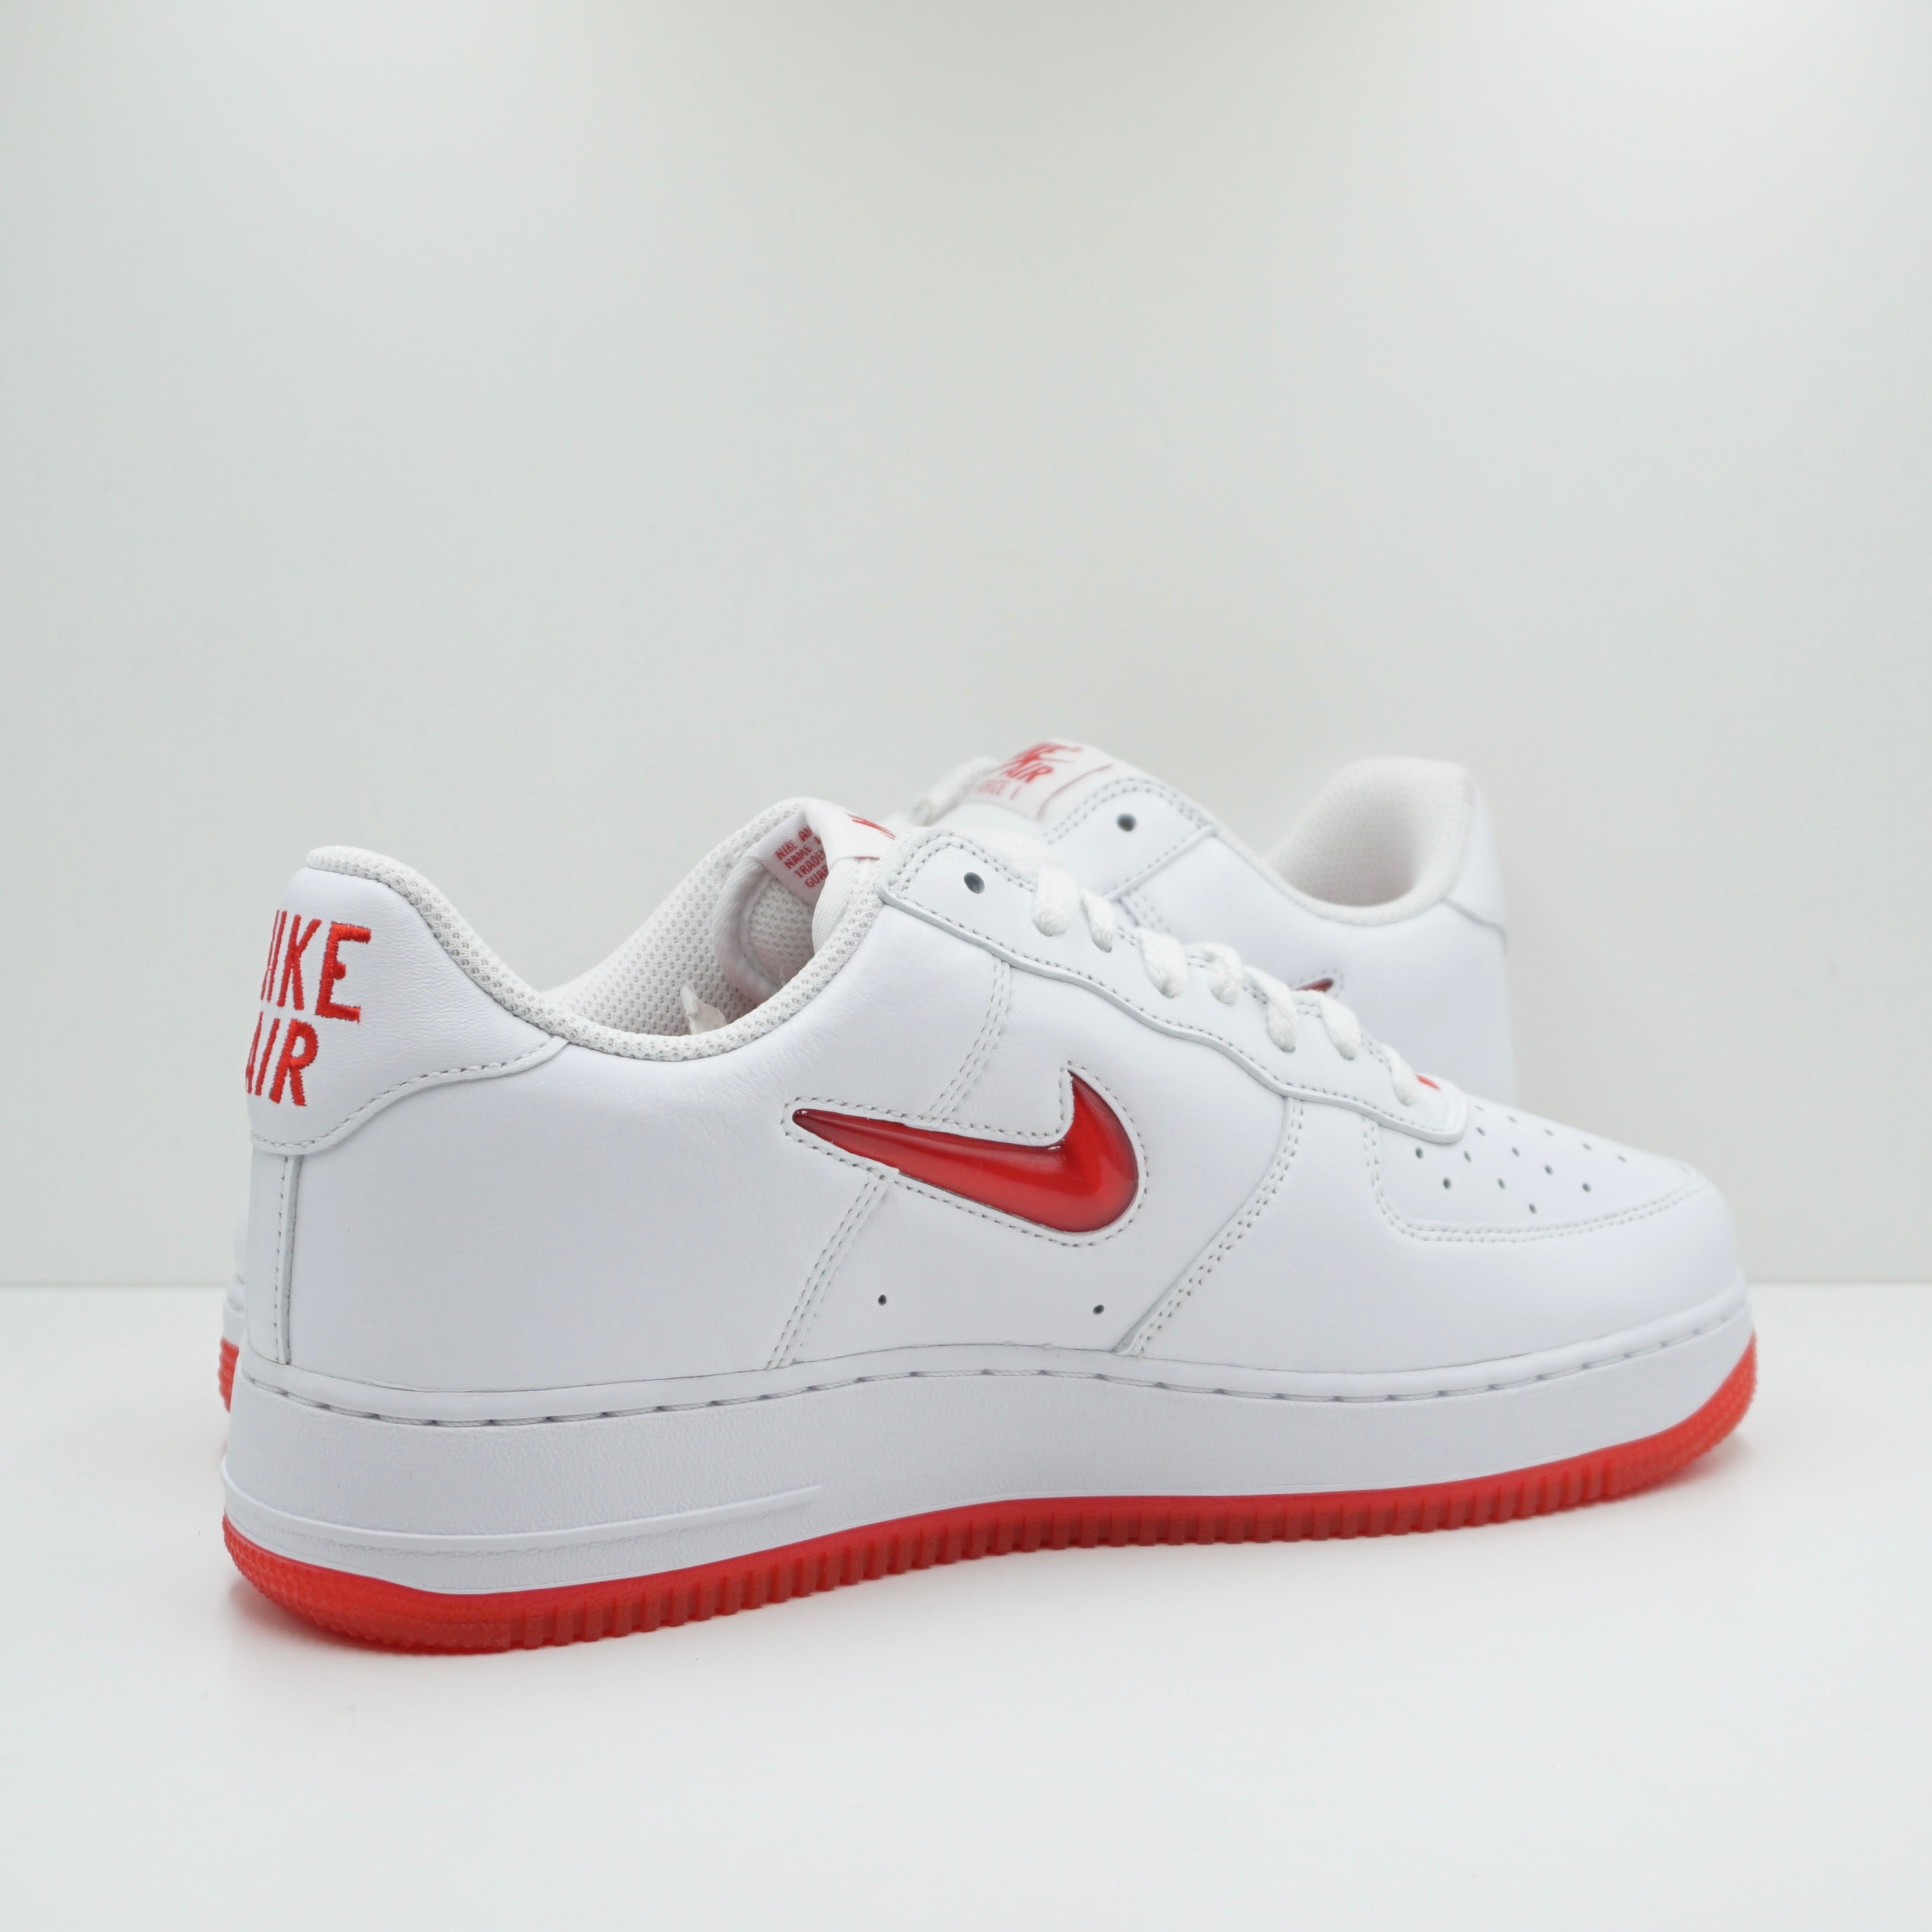 Nike Air Force 1 Low '07 Retro Color Of The Month Jewel Swoosh University Red